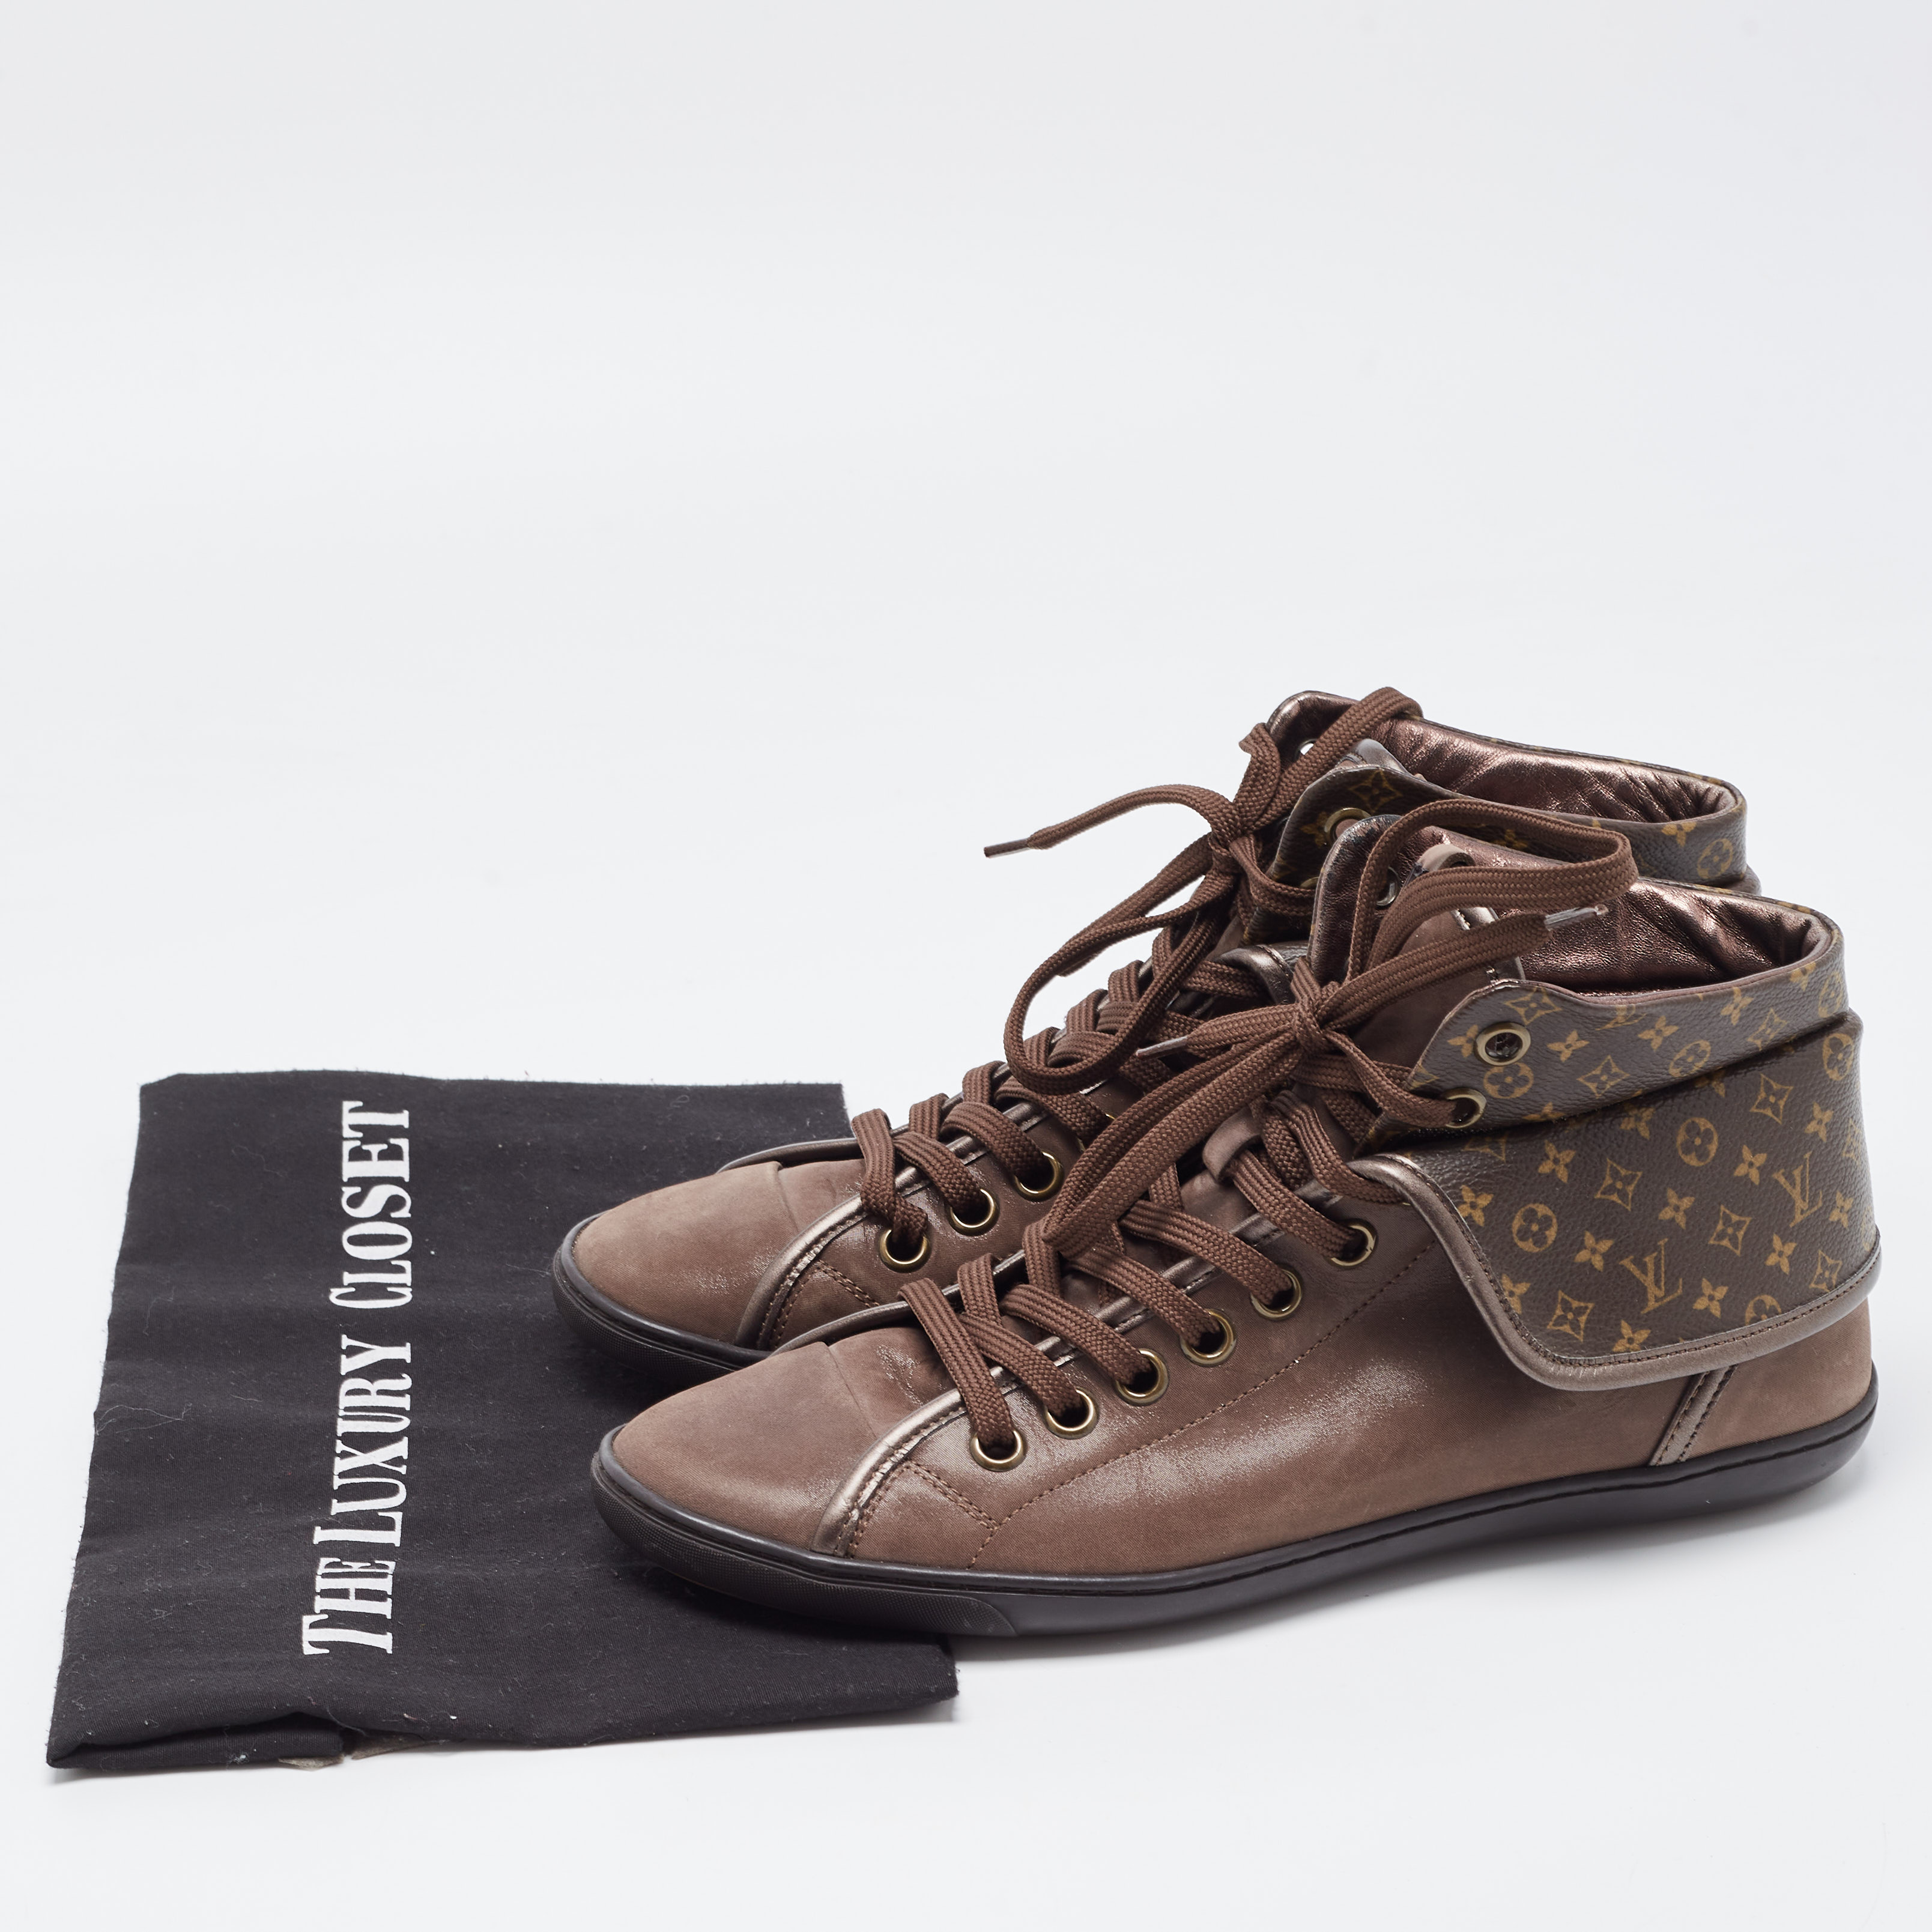 Louis Vuitton Brown Monogram Canvas And Nubuck Leather Brea Sneakers Size 38.5